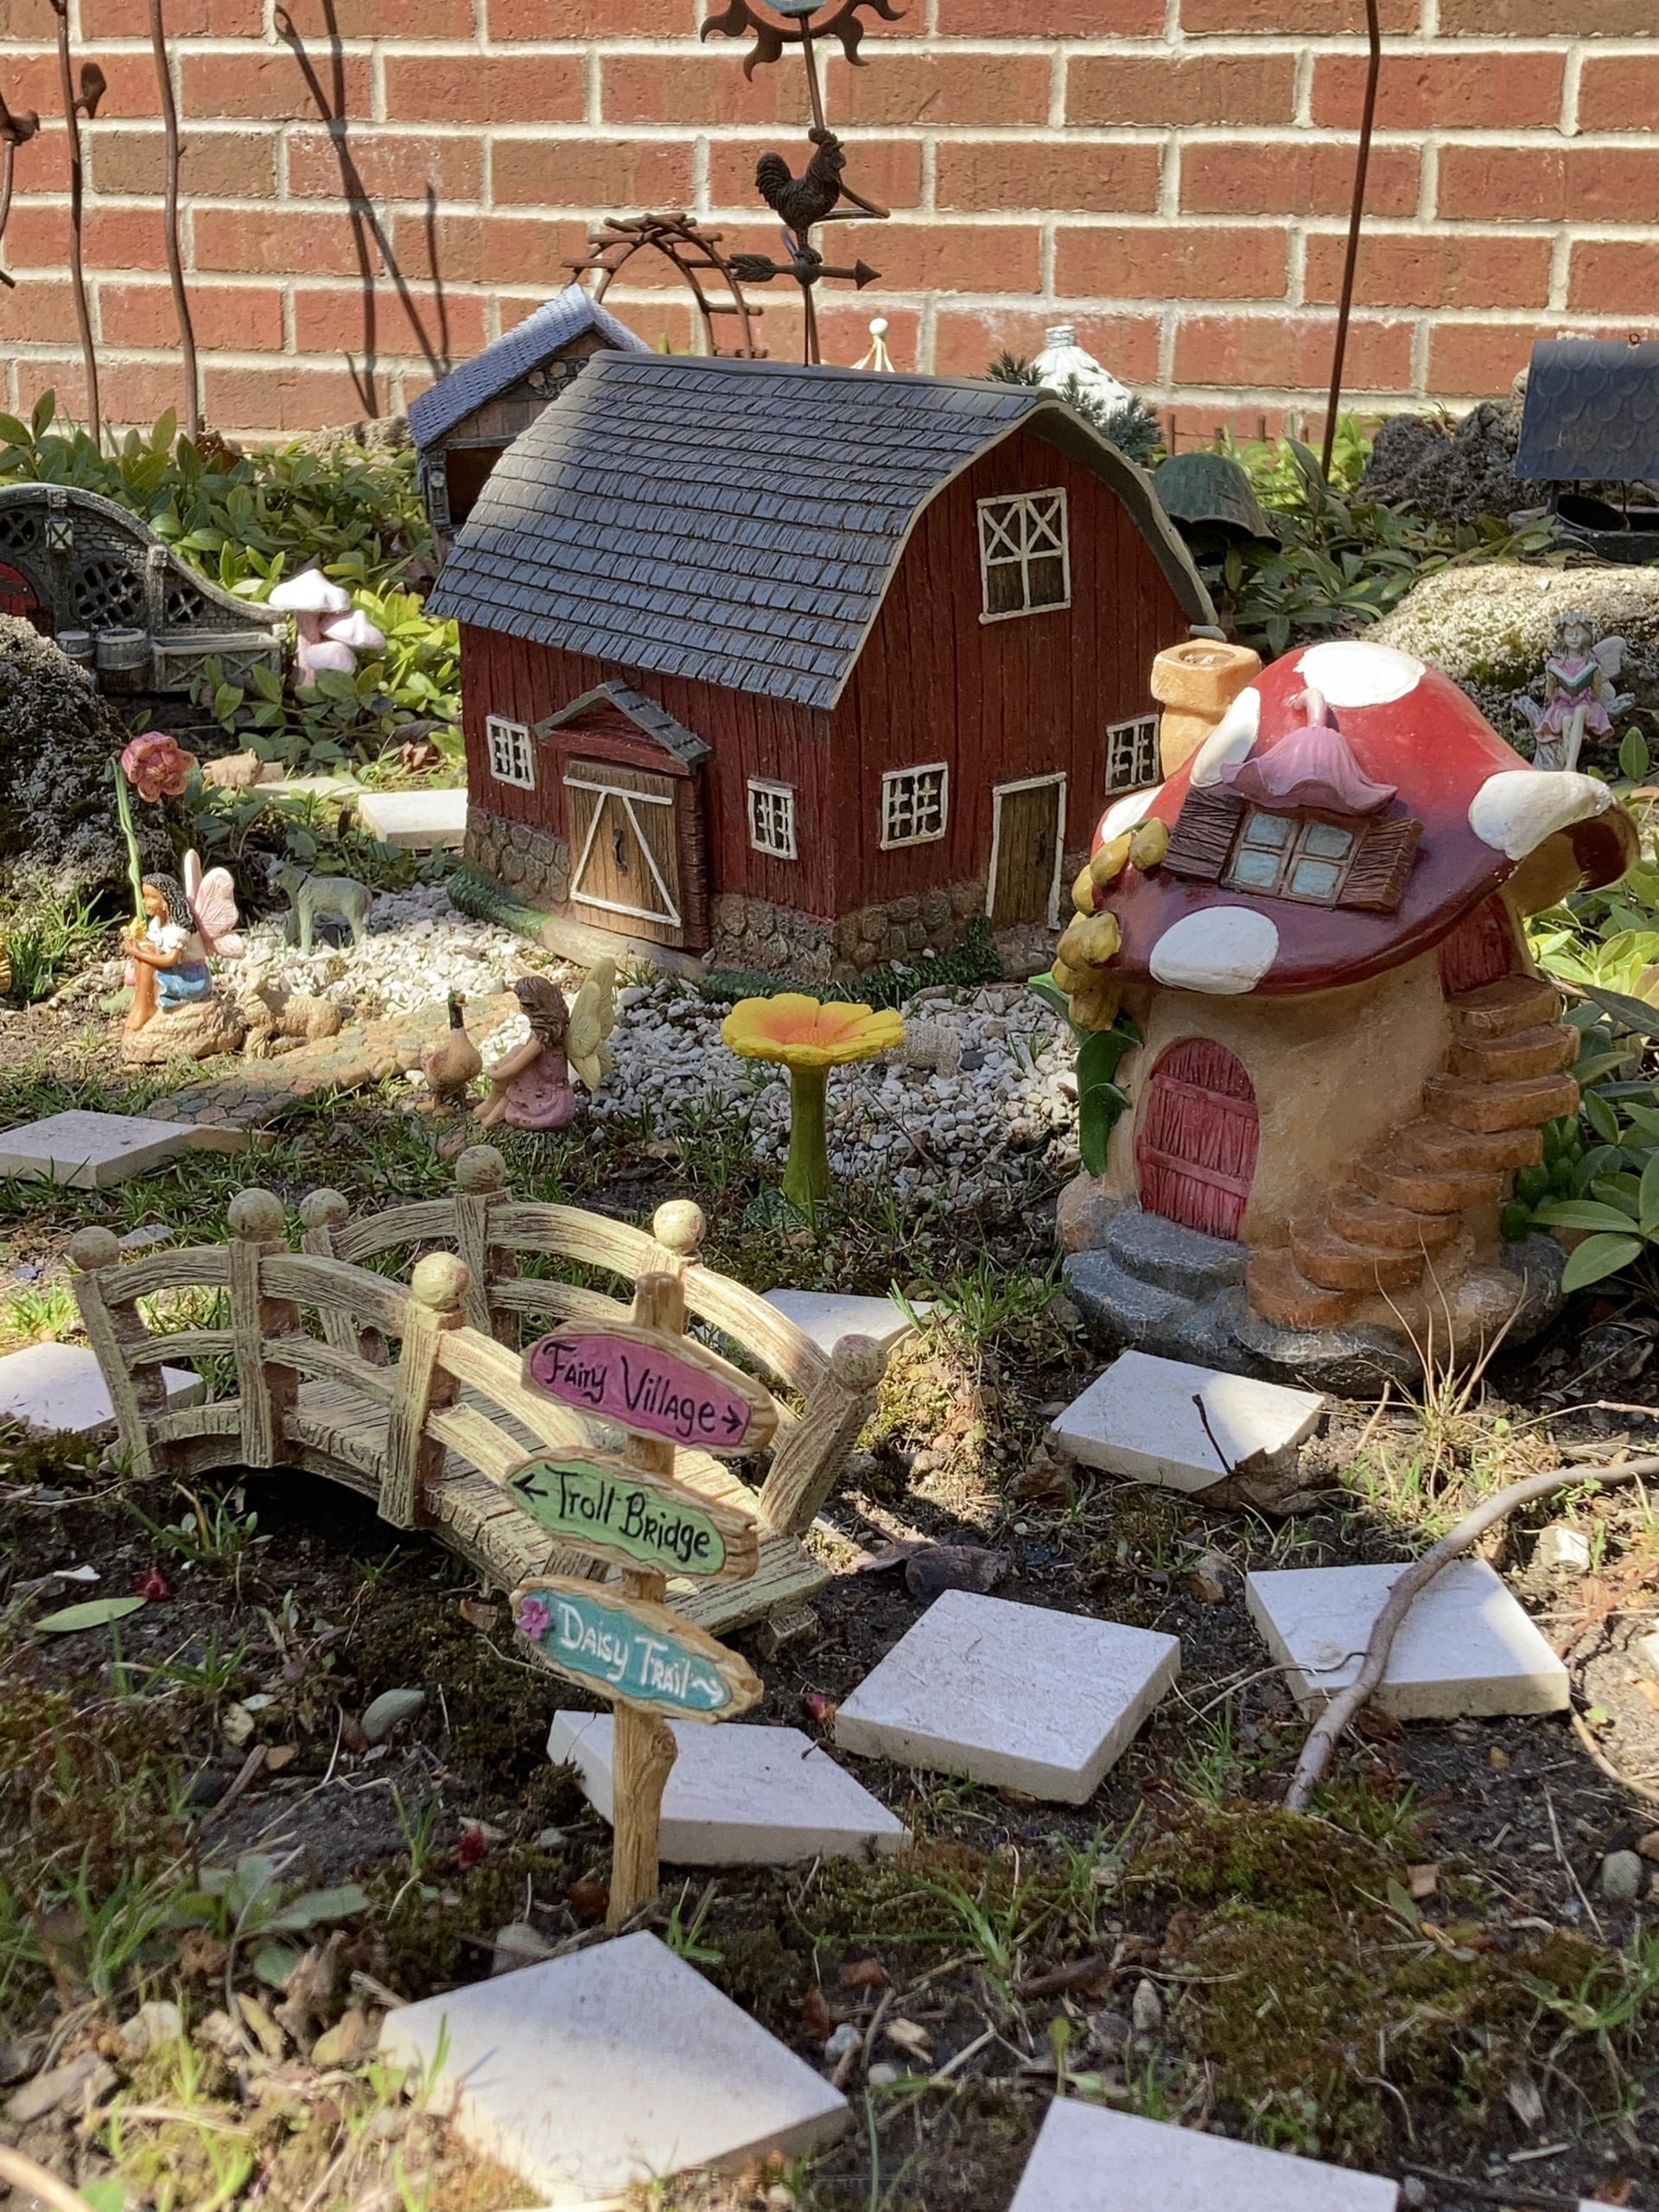 Fairy garden at the Chelsea District Library